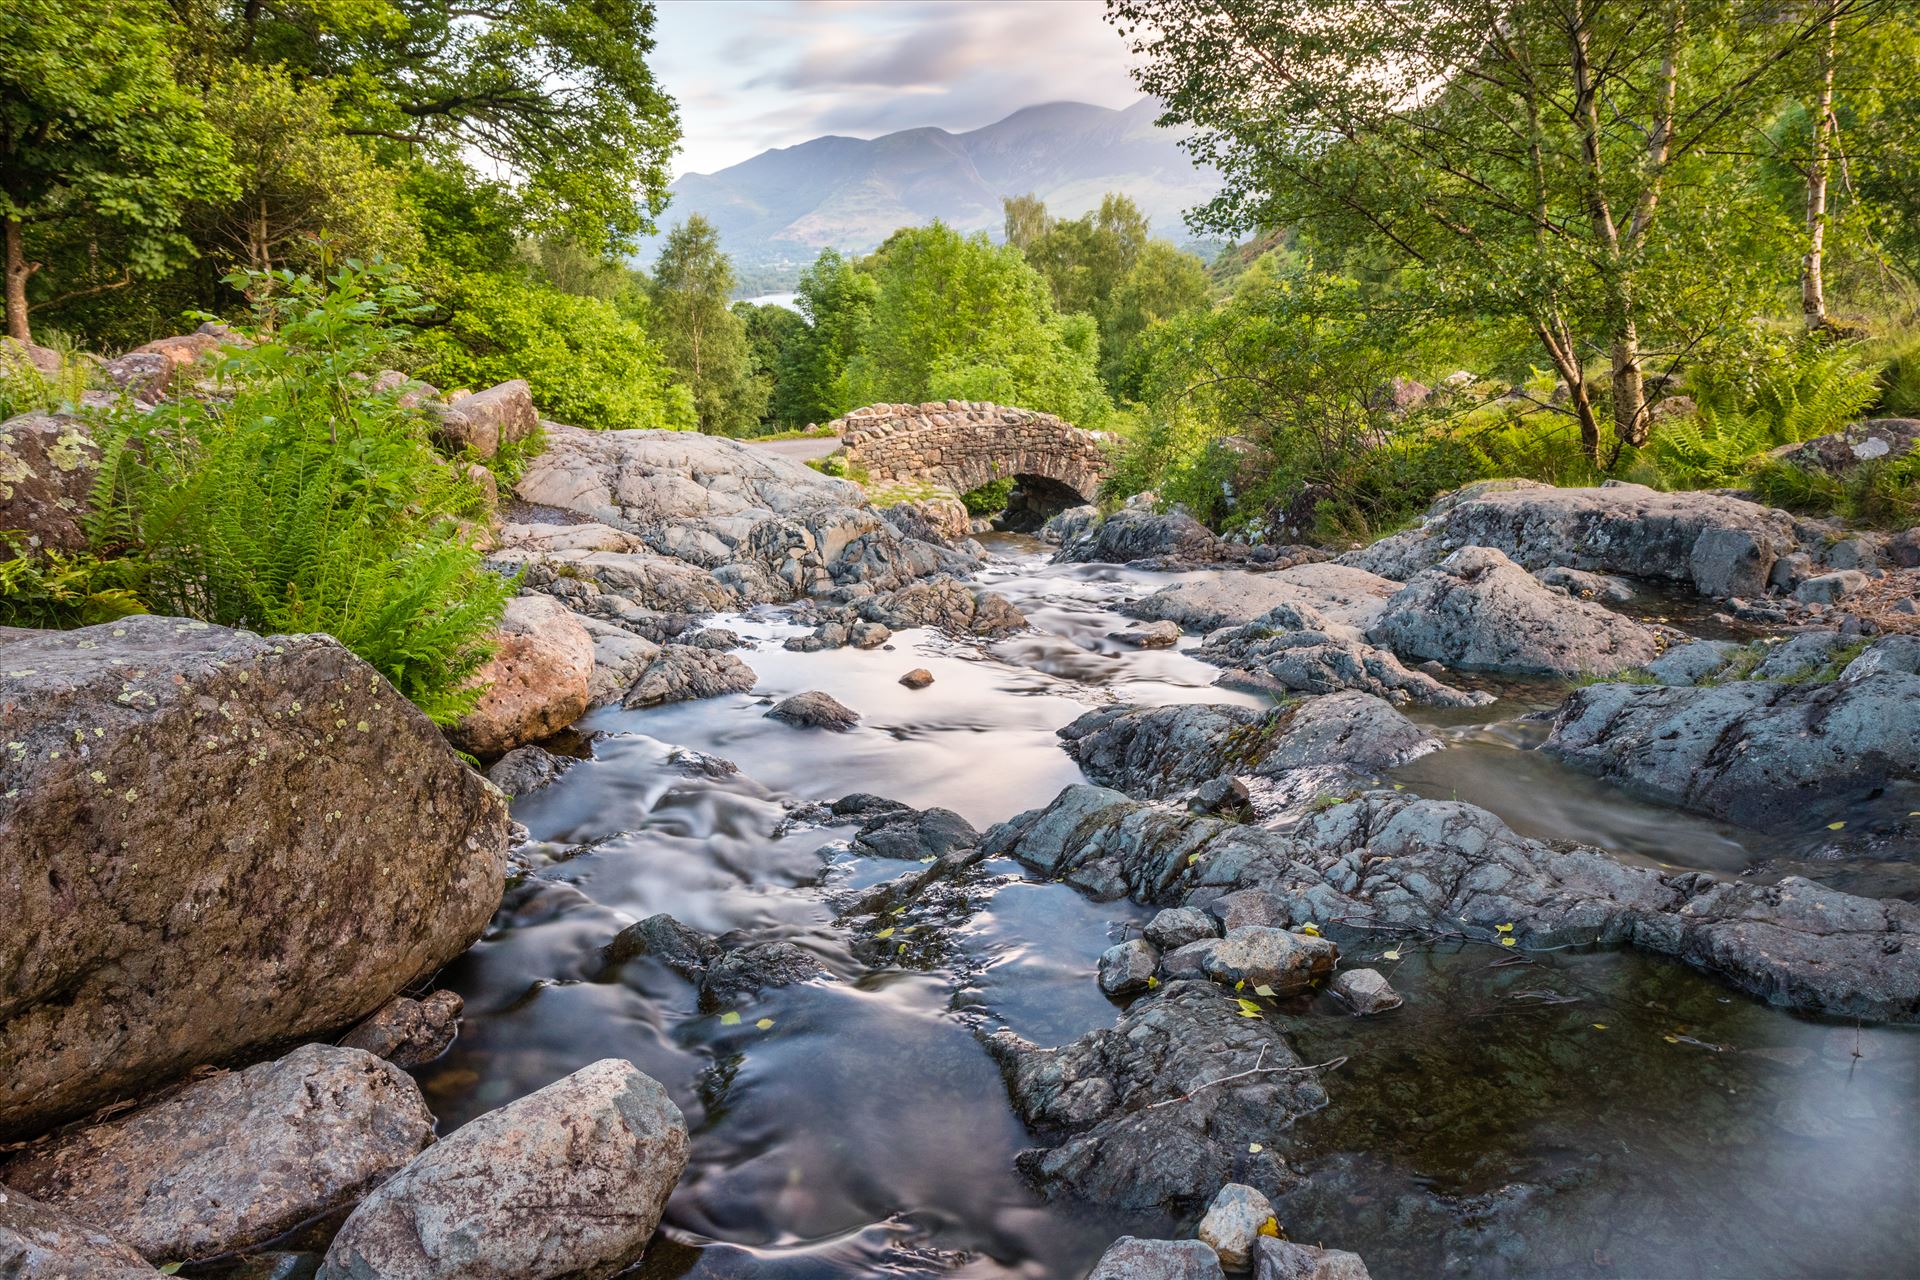 Ashness Bridge Long exposure early morning shot of Ashness Bridge in the Lake District near Keswick just off Derwent Water on the way up to Surprise View. by Tony Keogh Photography